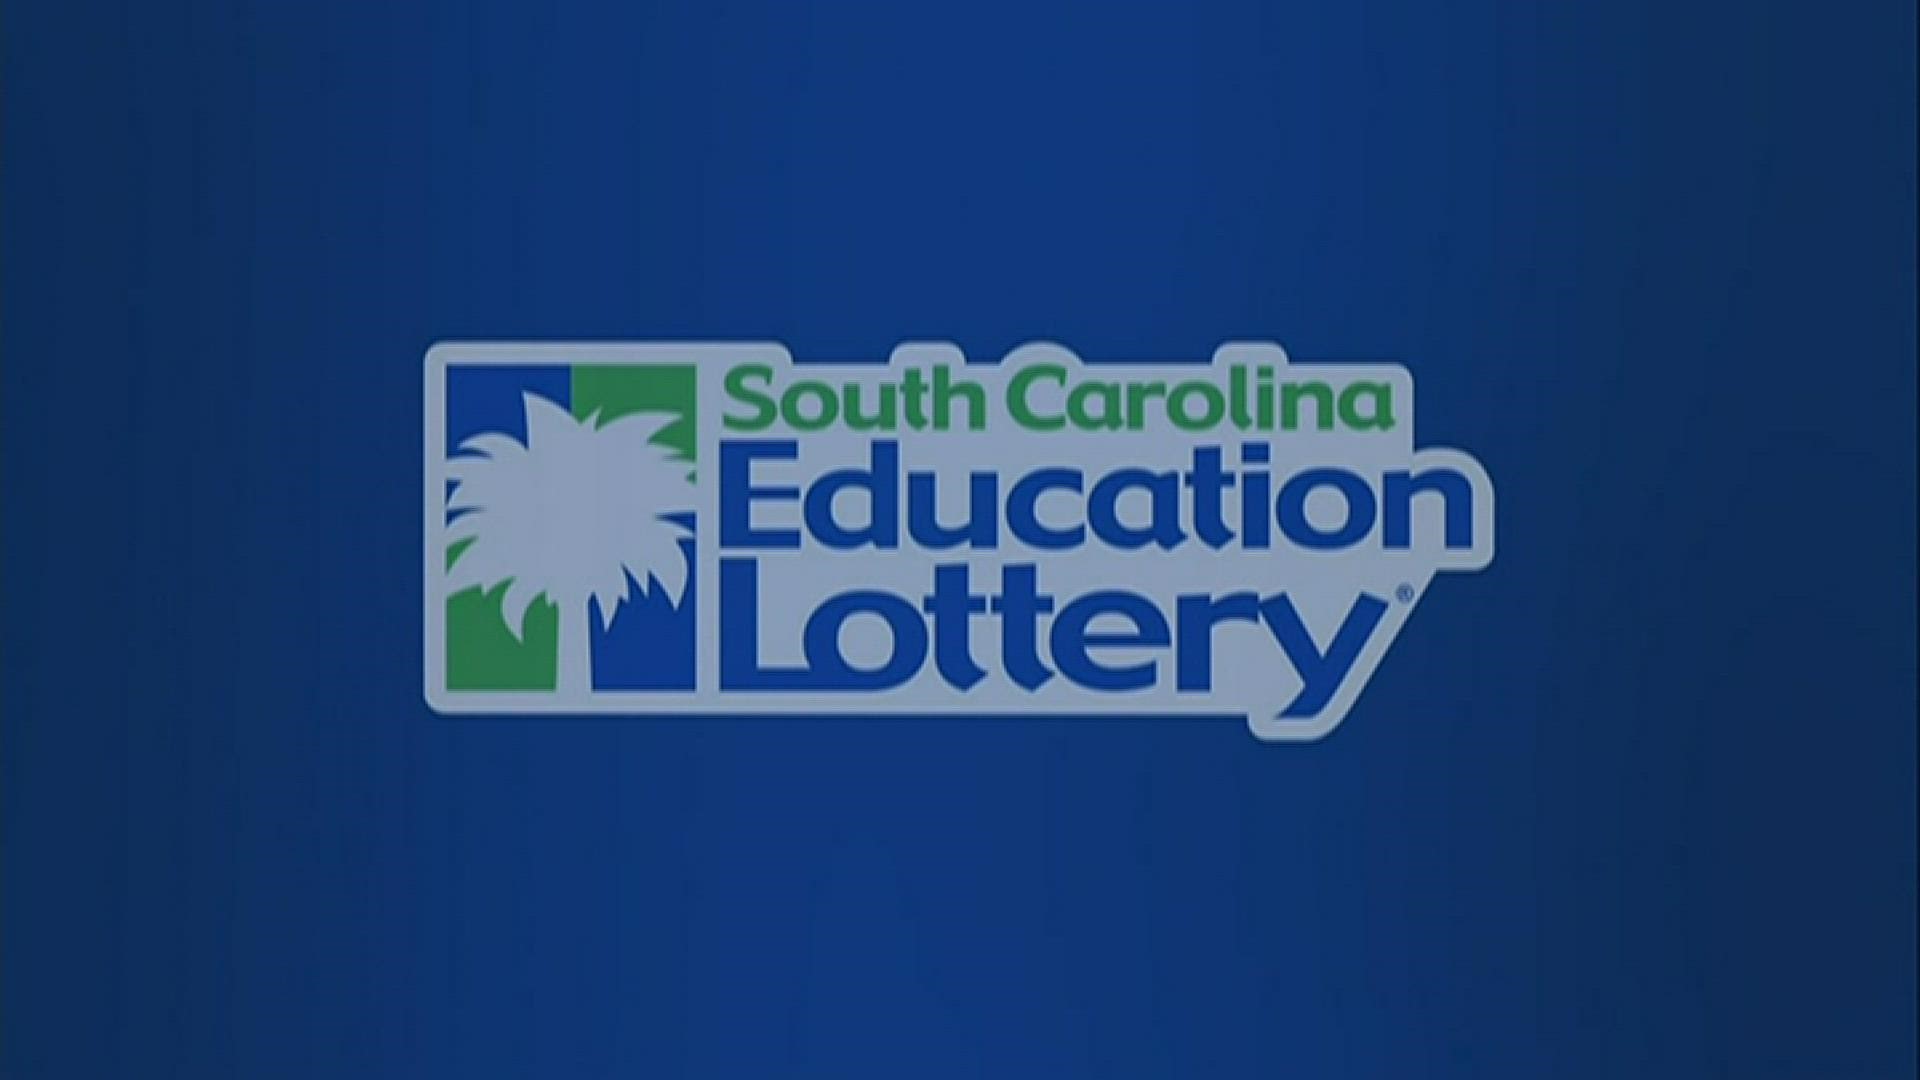 Winning lottery results for South Carolina Education lottery 11 25 2021